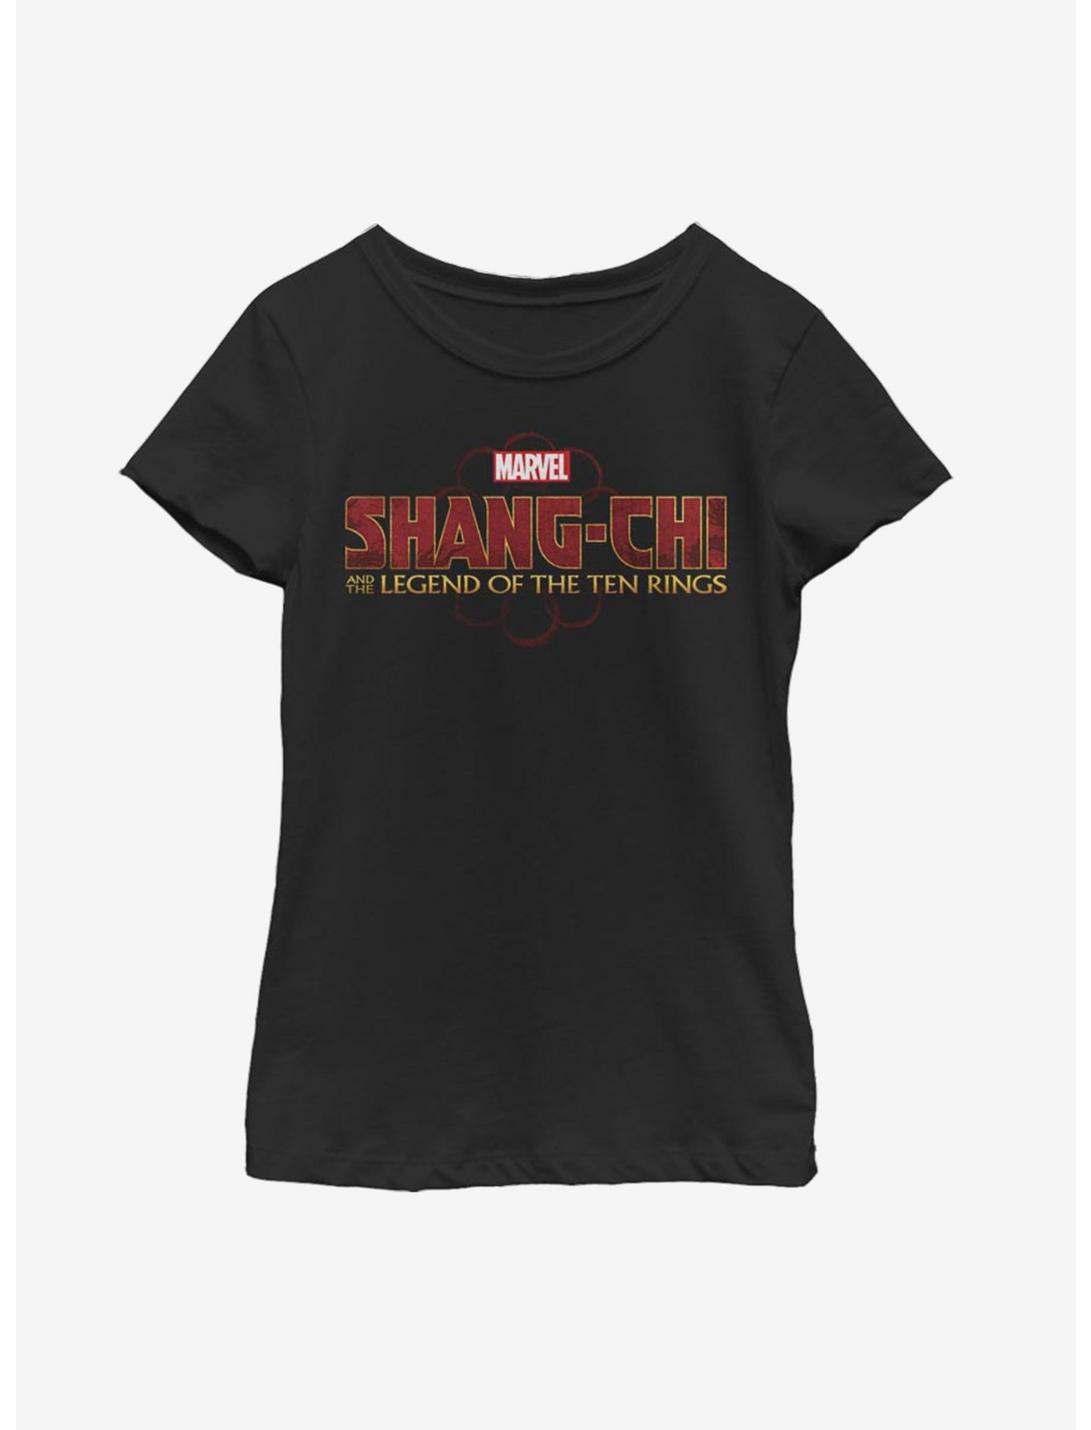 Marvel Shang-Chi And The Legend Of The Ten Rings Youth Girls T-Shirt, BLACK, hi-res